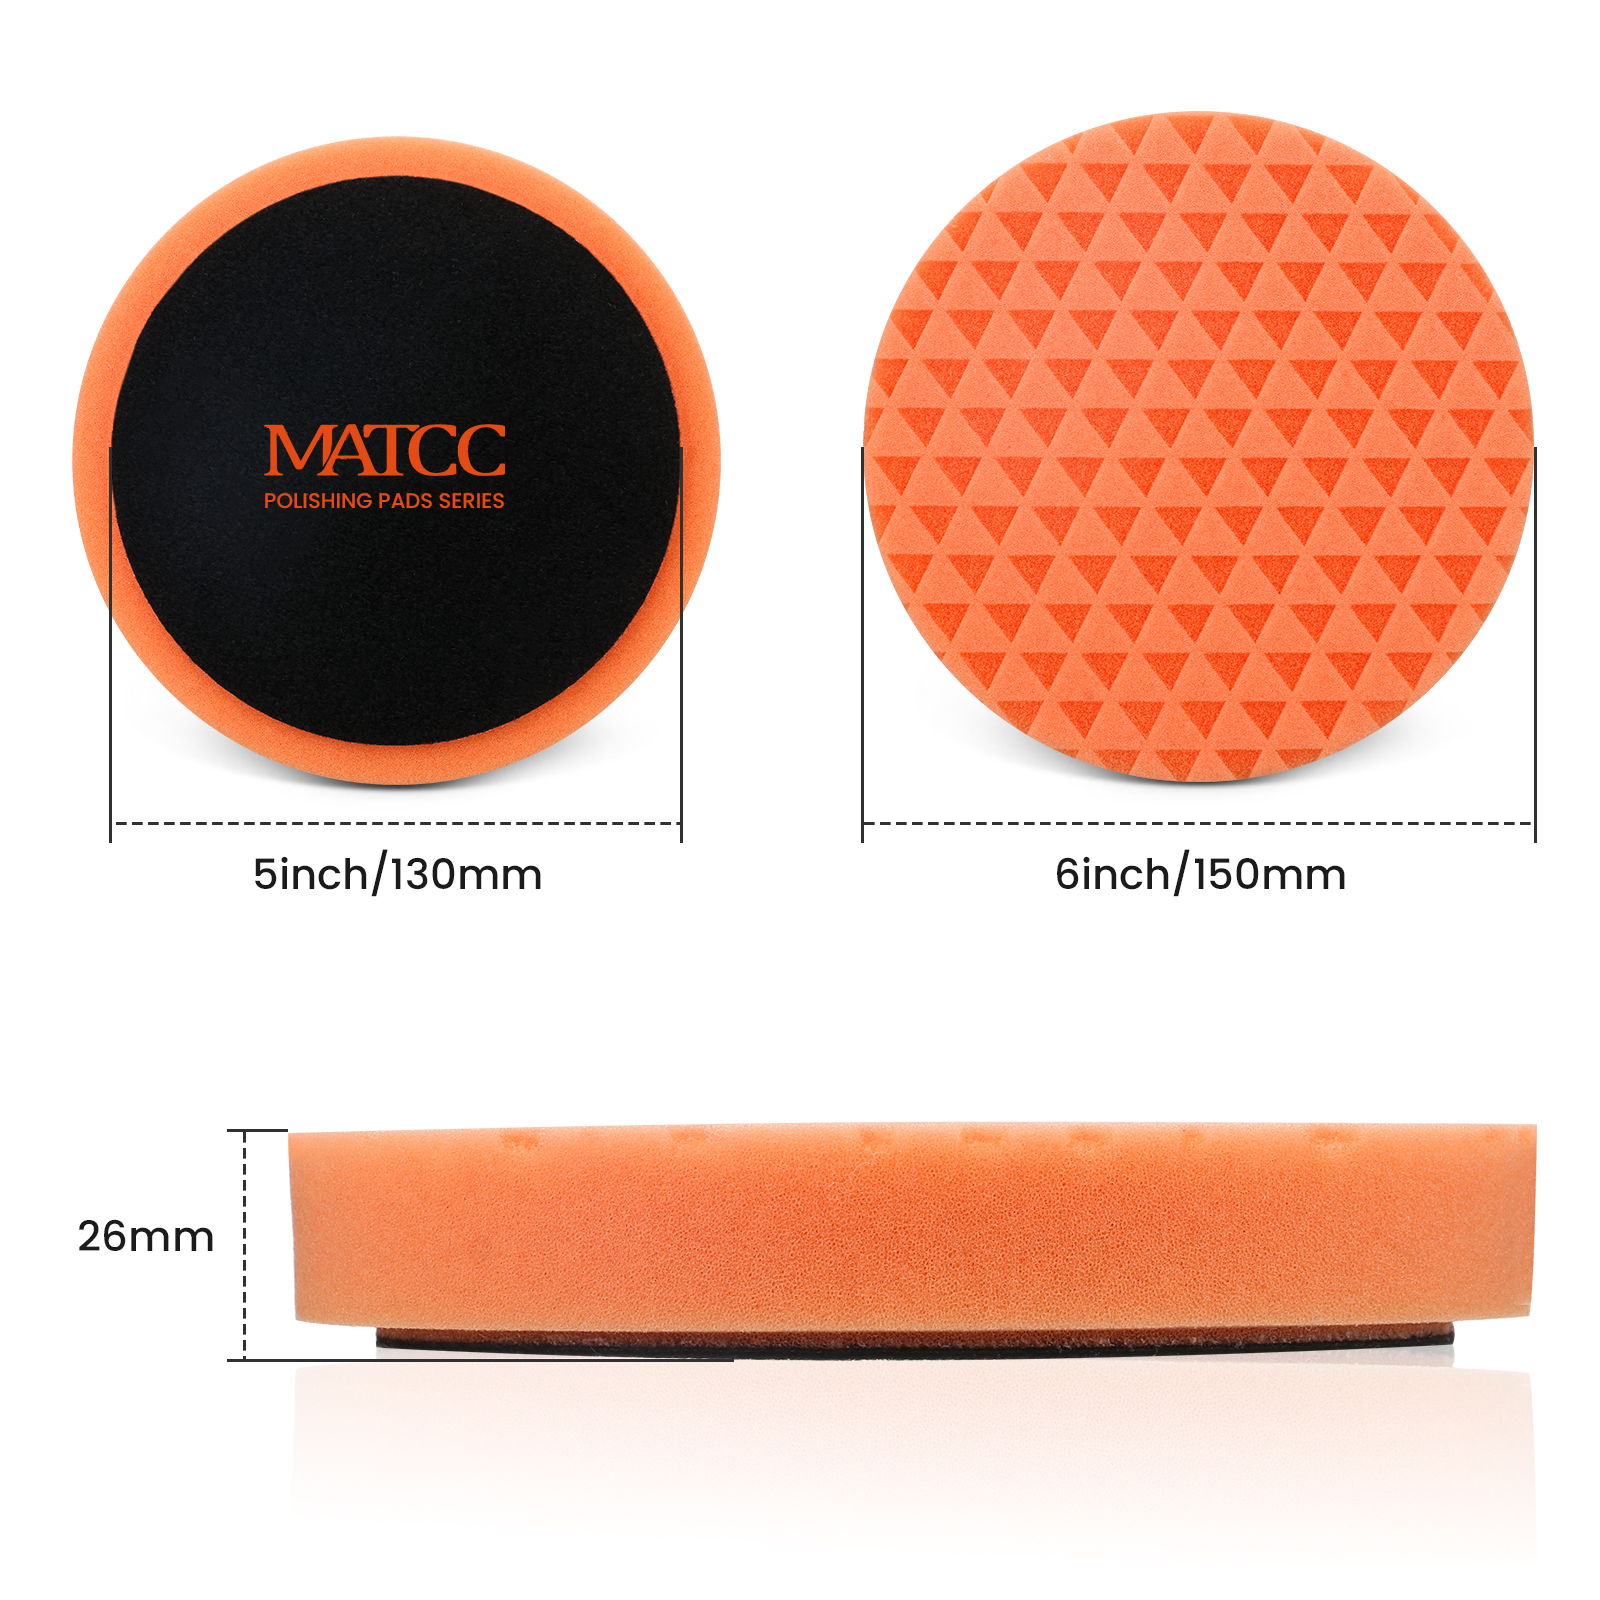 MATCC-8Pcs-6-Inch-Car-Polishing-Pad-Kit-M14-Buffing-Pads-with-Wool-Bonnet-Pads-for-Car-Polisher-and--1878198-7